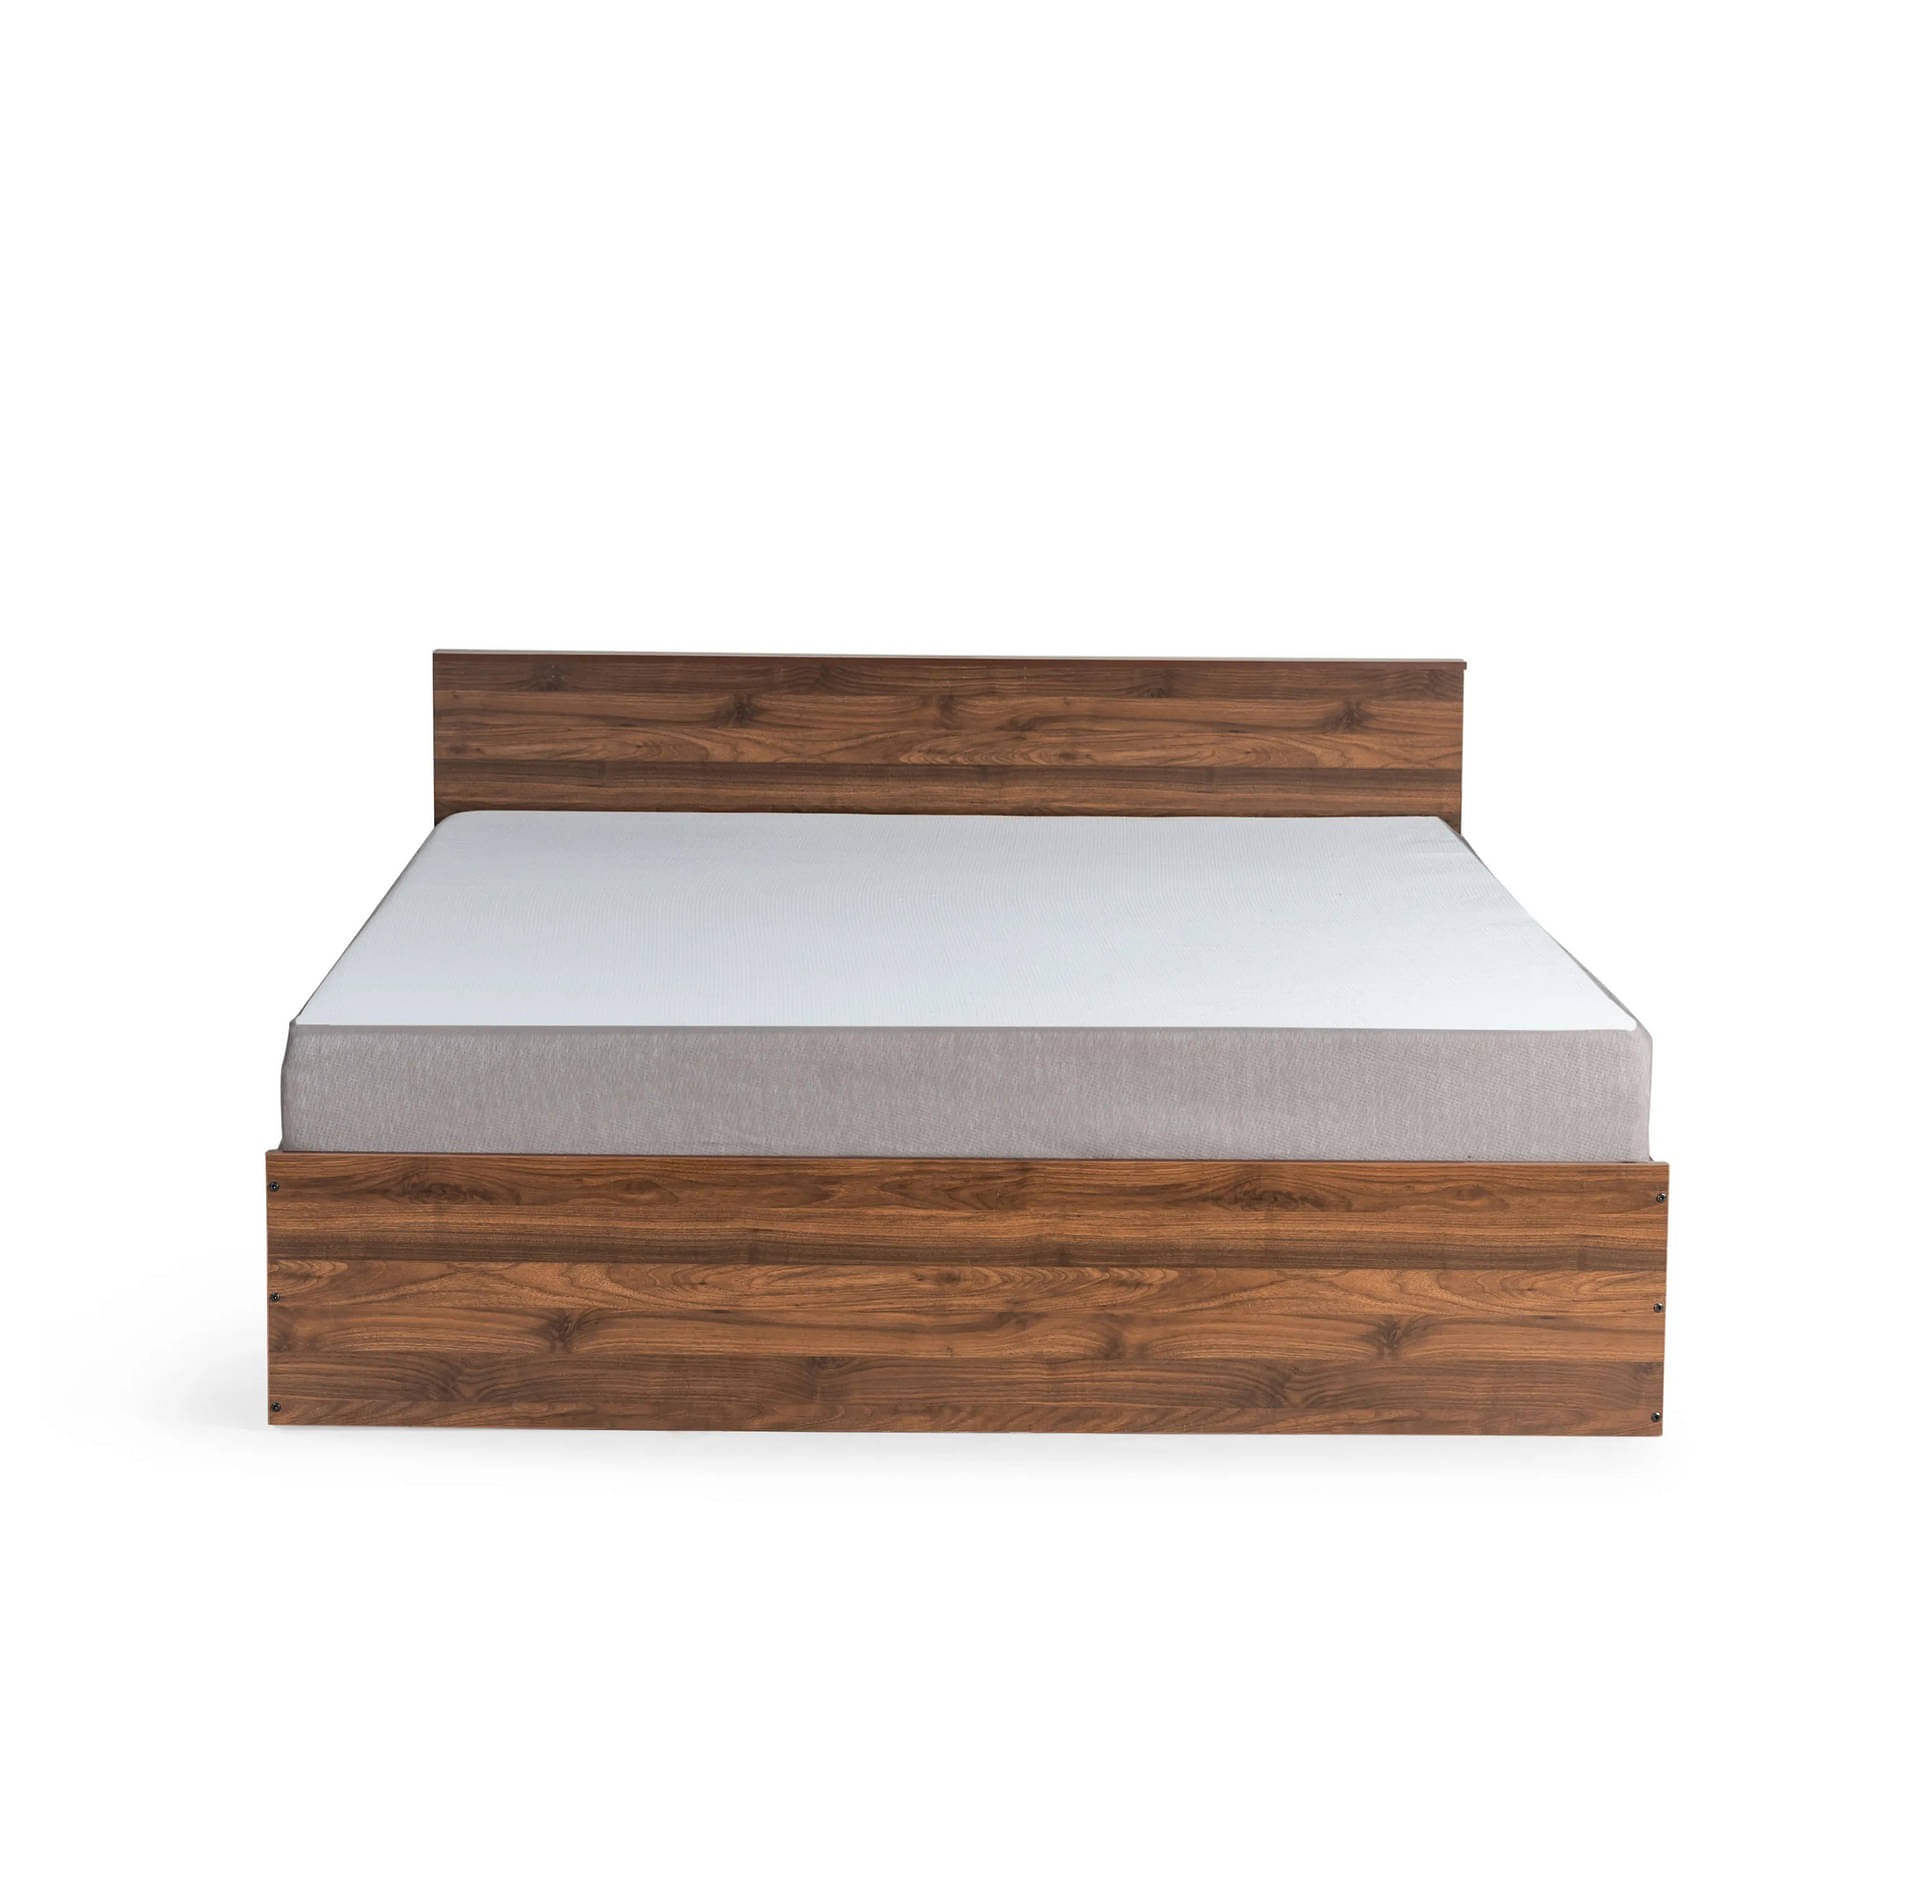 Werfo Taurus King size Engineered Wood Bed with Storage - L 2.09m x H 79.5cm (82.28 x 31.29 inches)